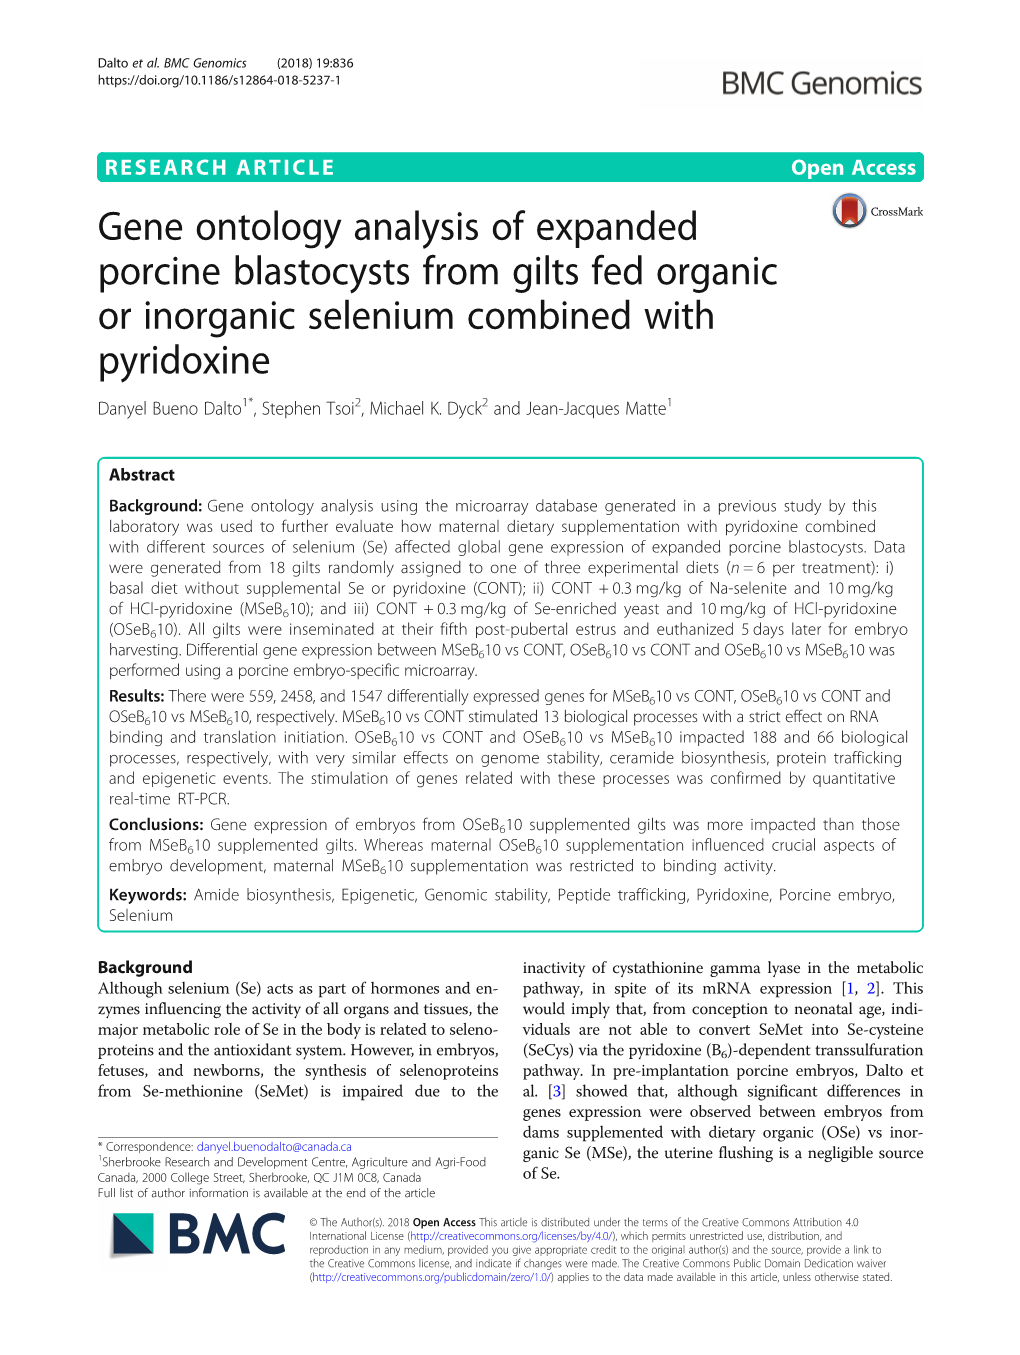 Gene Ontology Analysis of Expanded Porcine Blastocysts from Gilts Fed